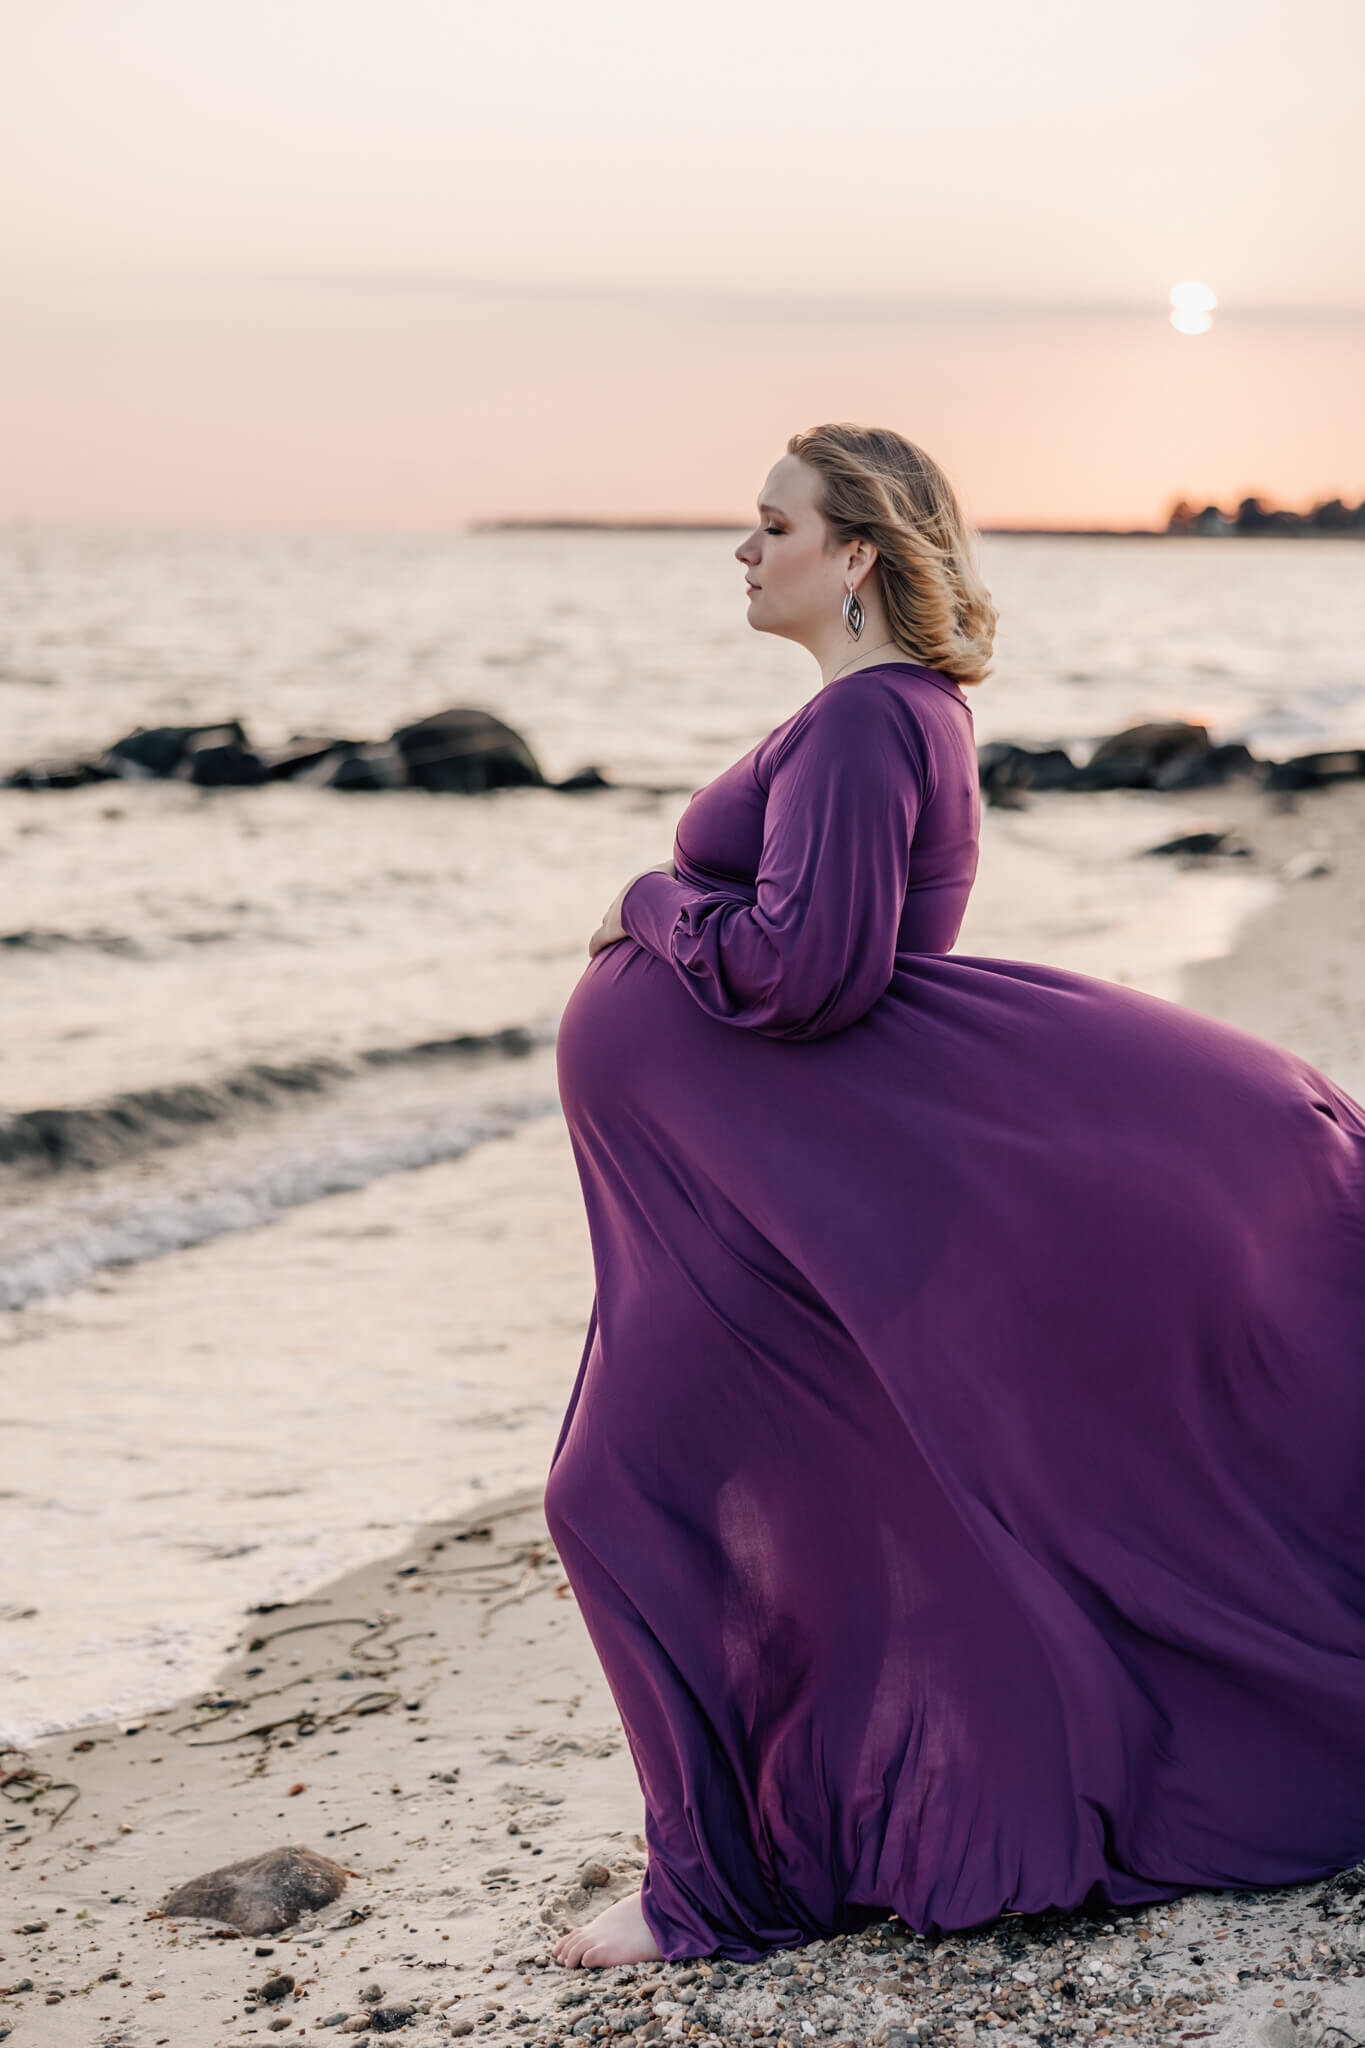 Pregnant woman on beach at sunset in purple dress